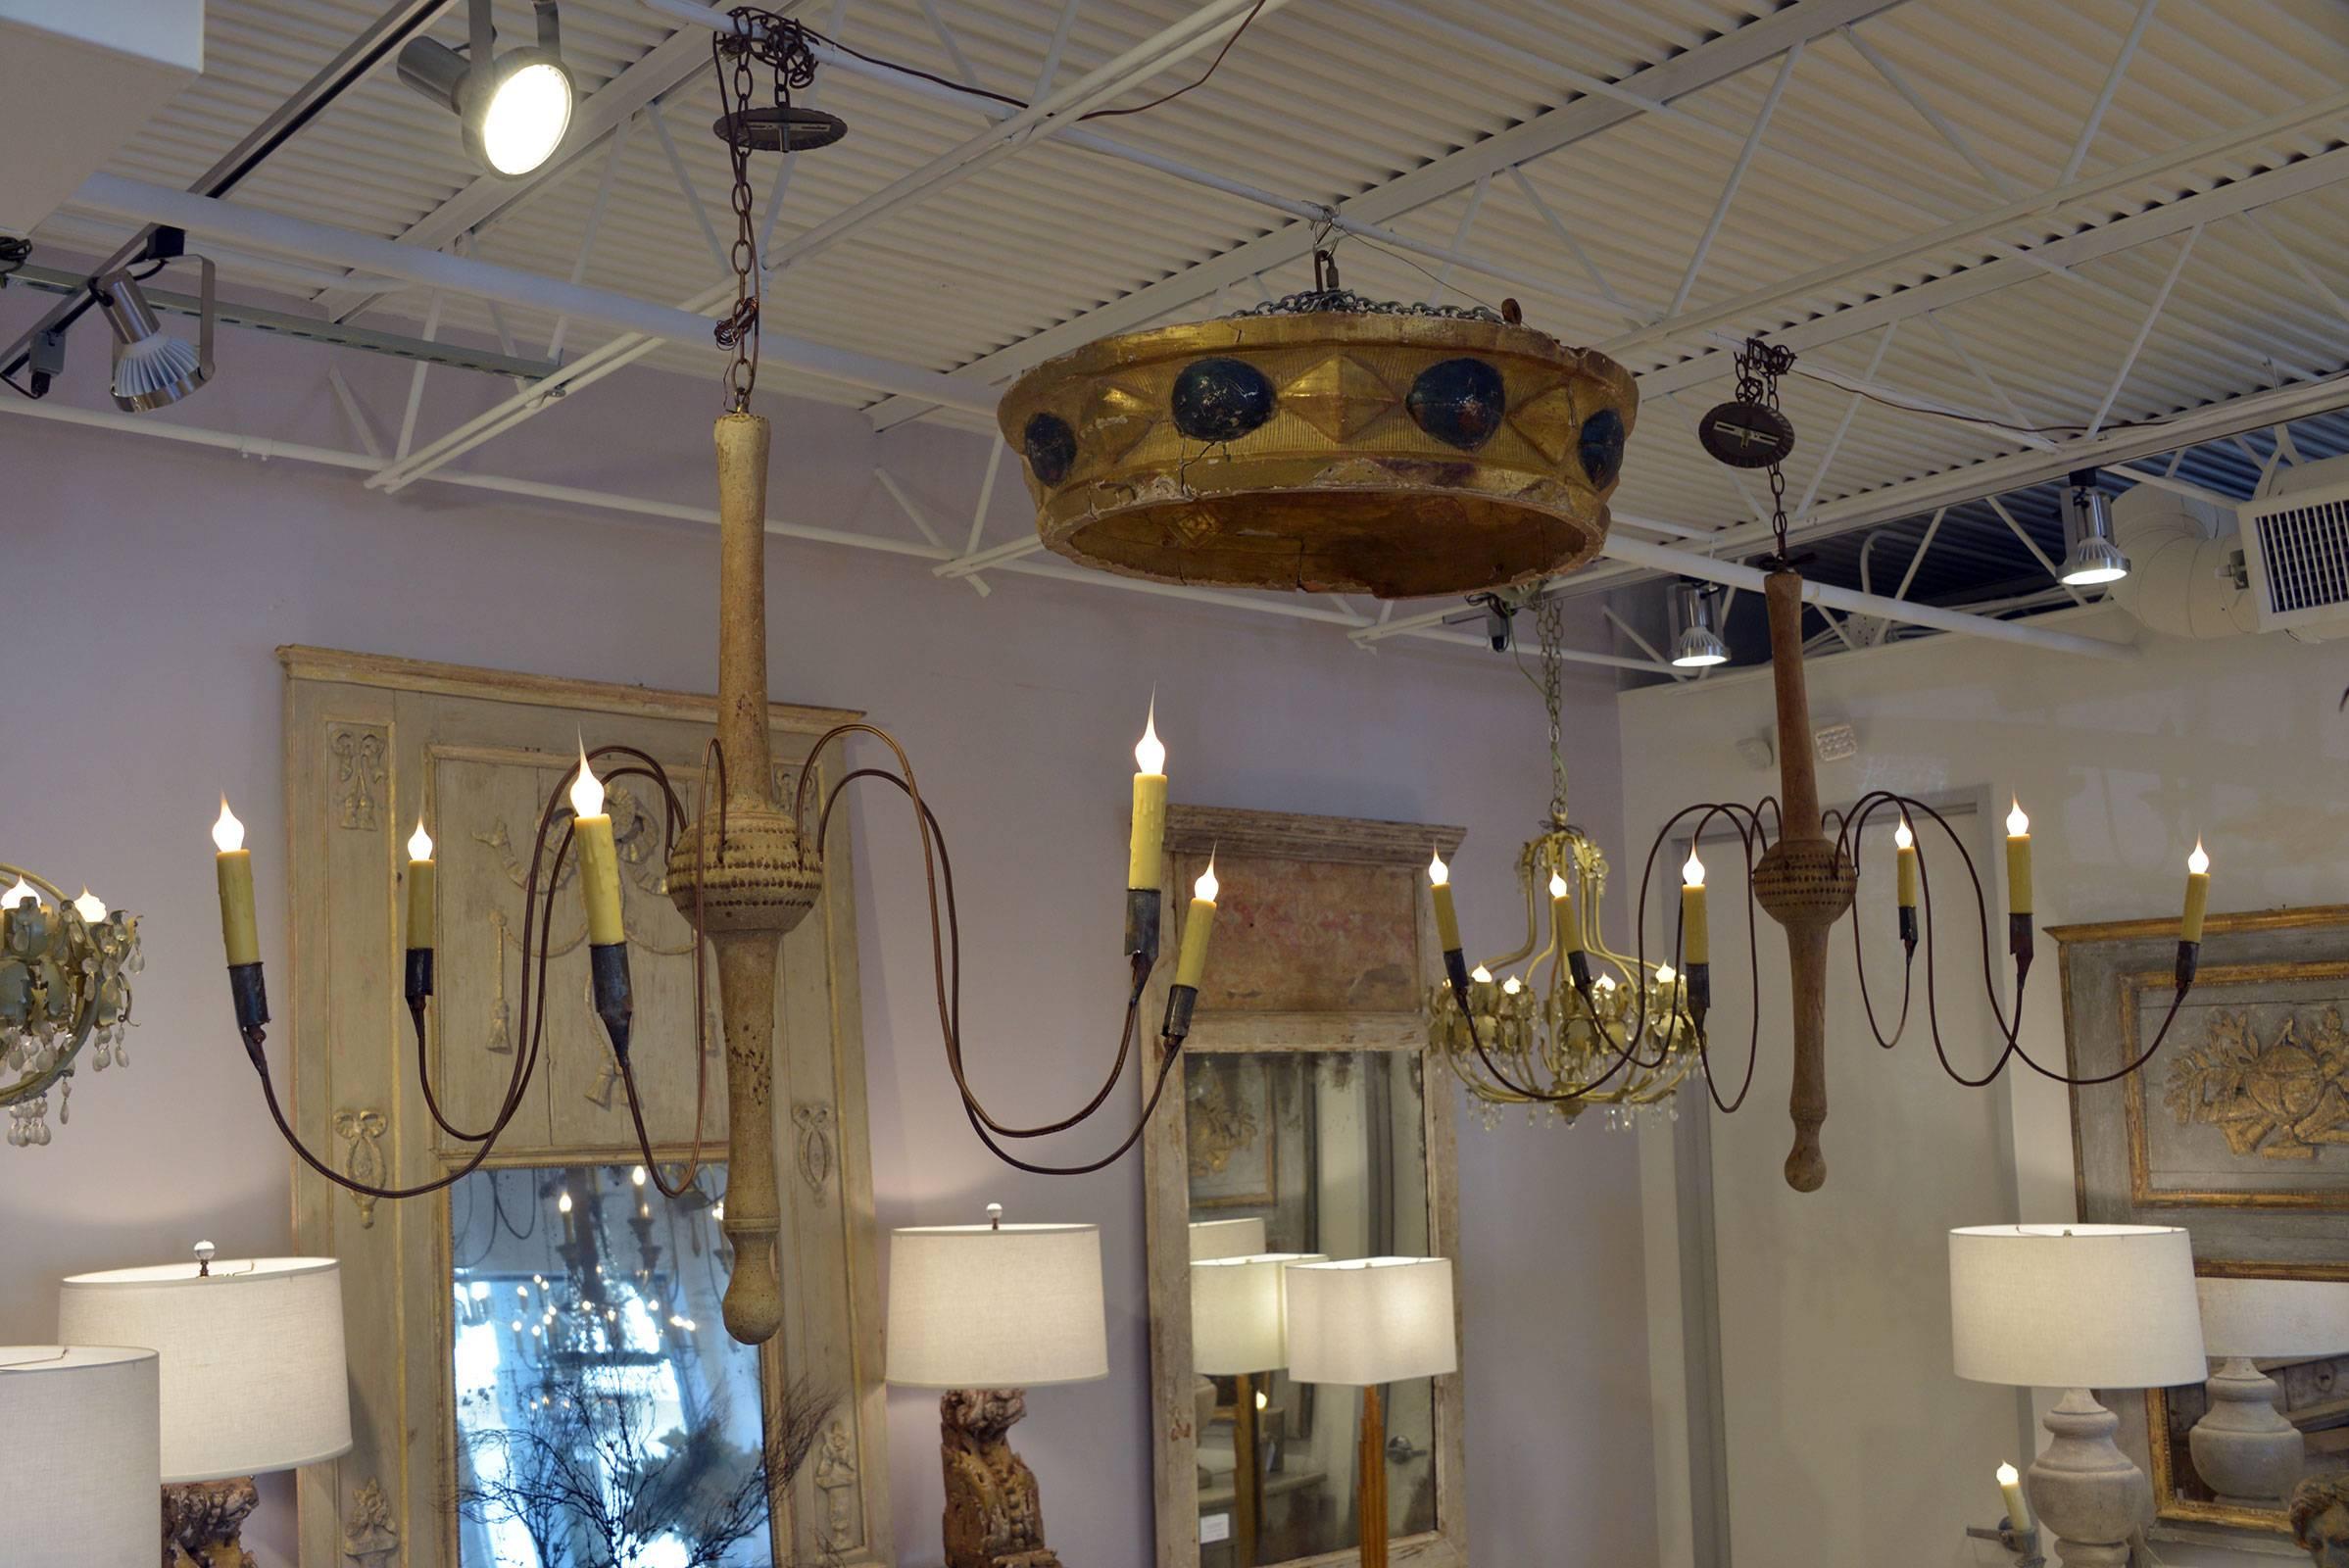 Rare pair of elegant 18th century Swedish chandeliers newly wired with chain and canopies, but otherwise in completely original condition. Each chandelier features a turned body of natural wood with an exquisite patina, simple decoration and six